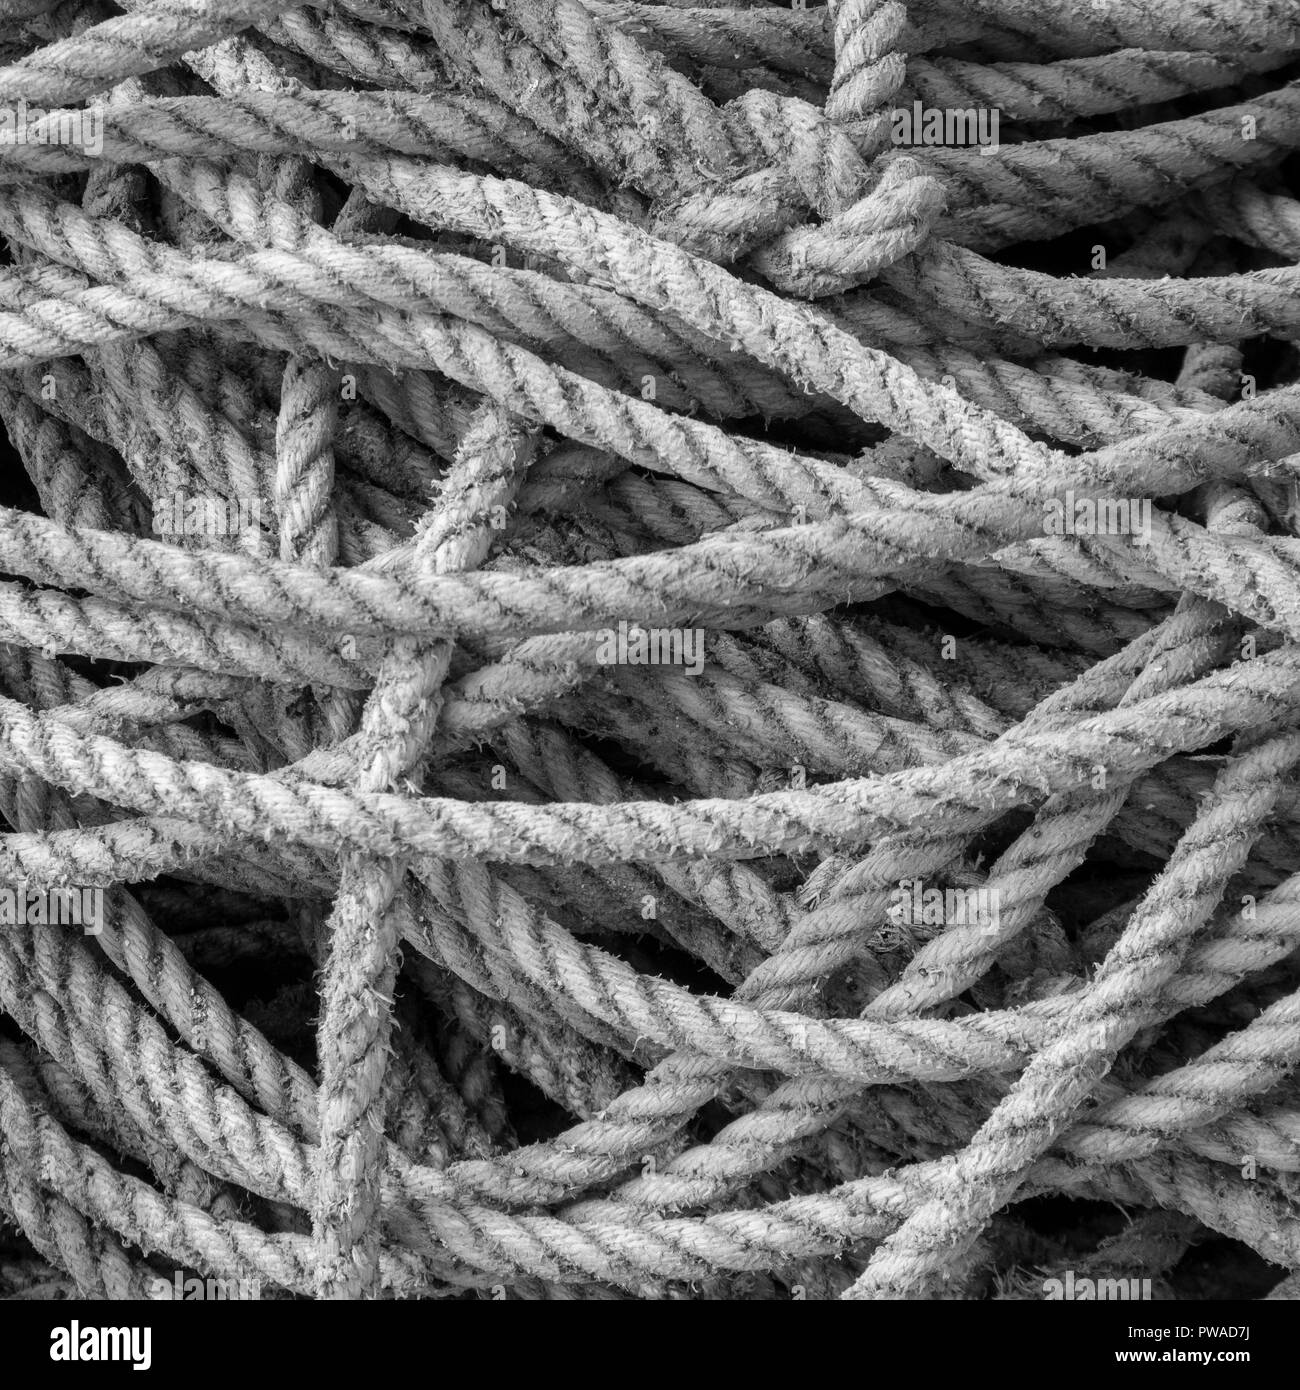 Black and White version of colour picture, of pile of fisherman's ropes. Metaphor 'given enough rope', entanglement. Stock Photo